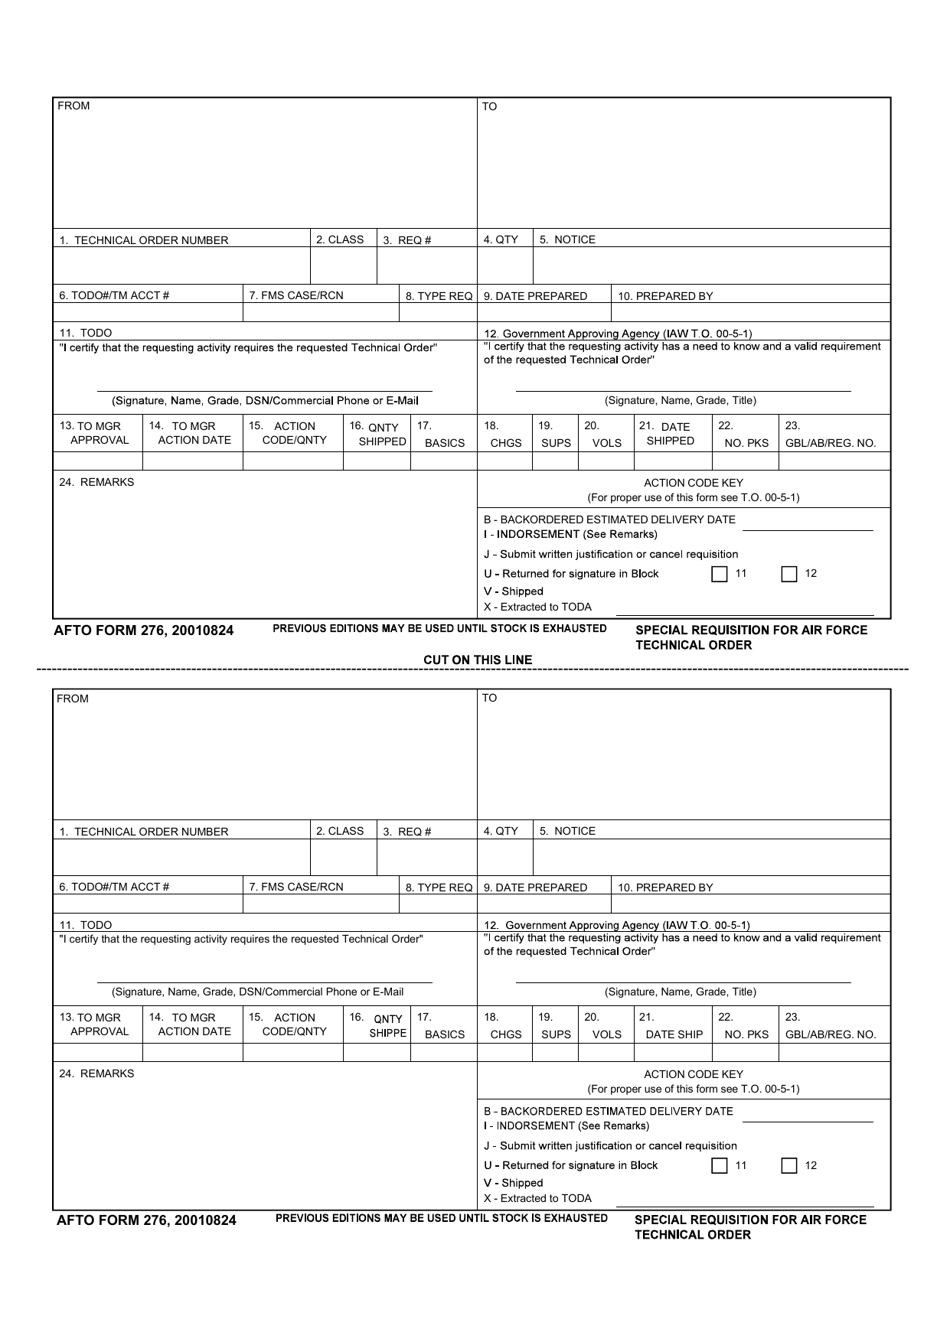 AFTO Form 276 Special Requisition for Air Force Technical Order, Page 1